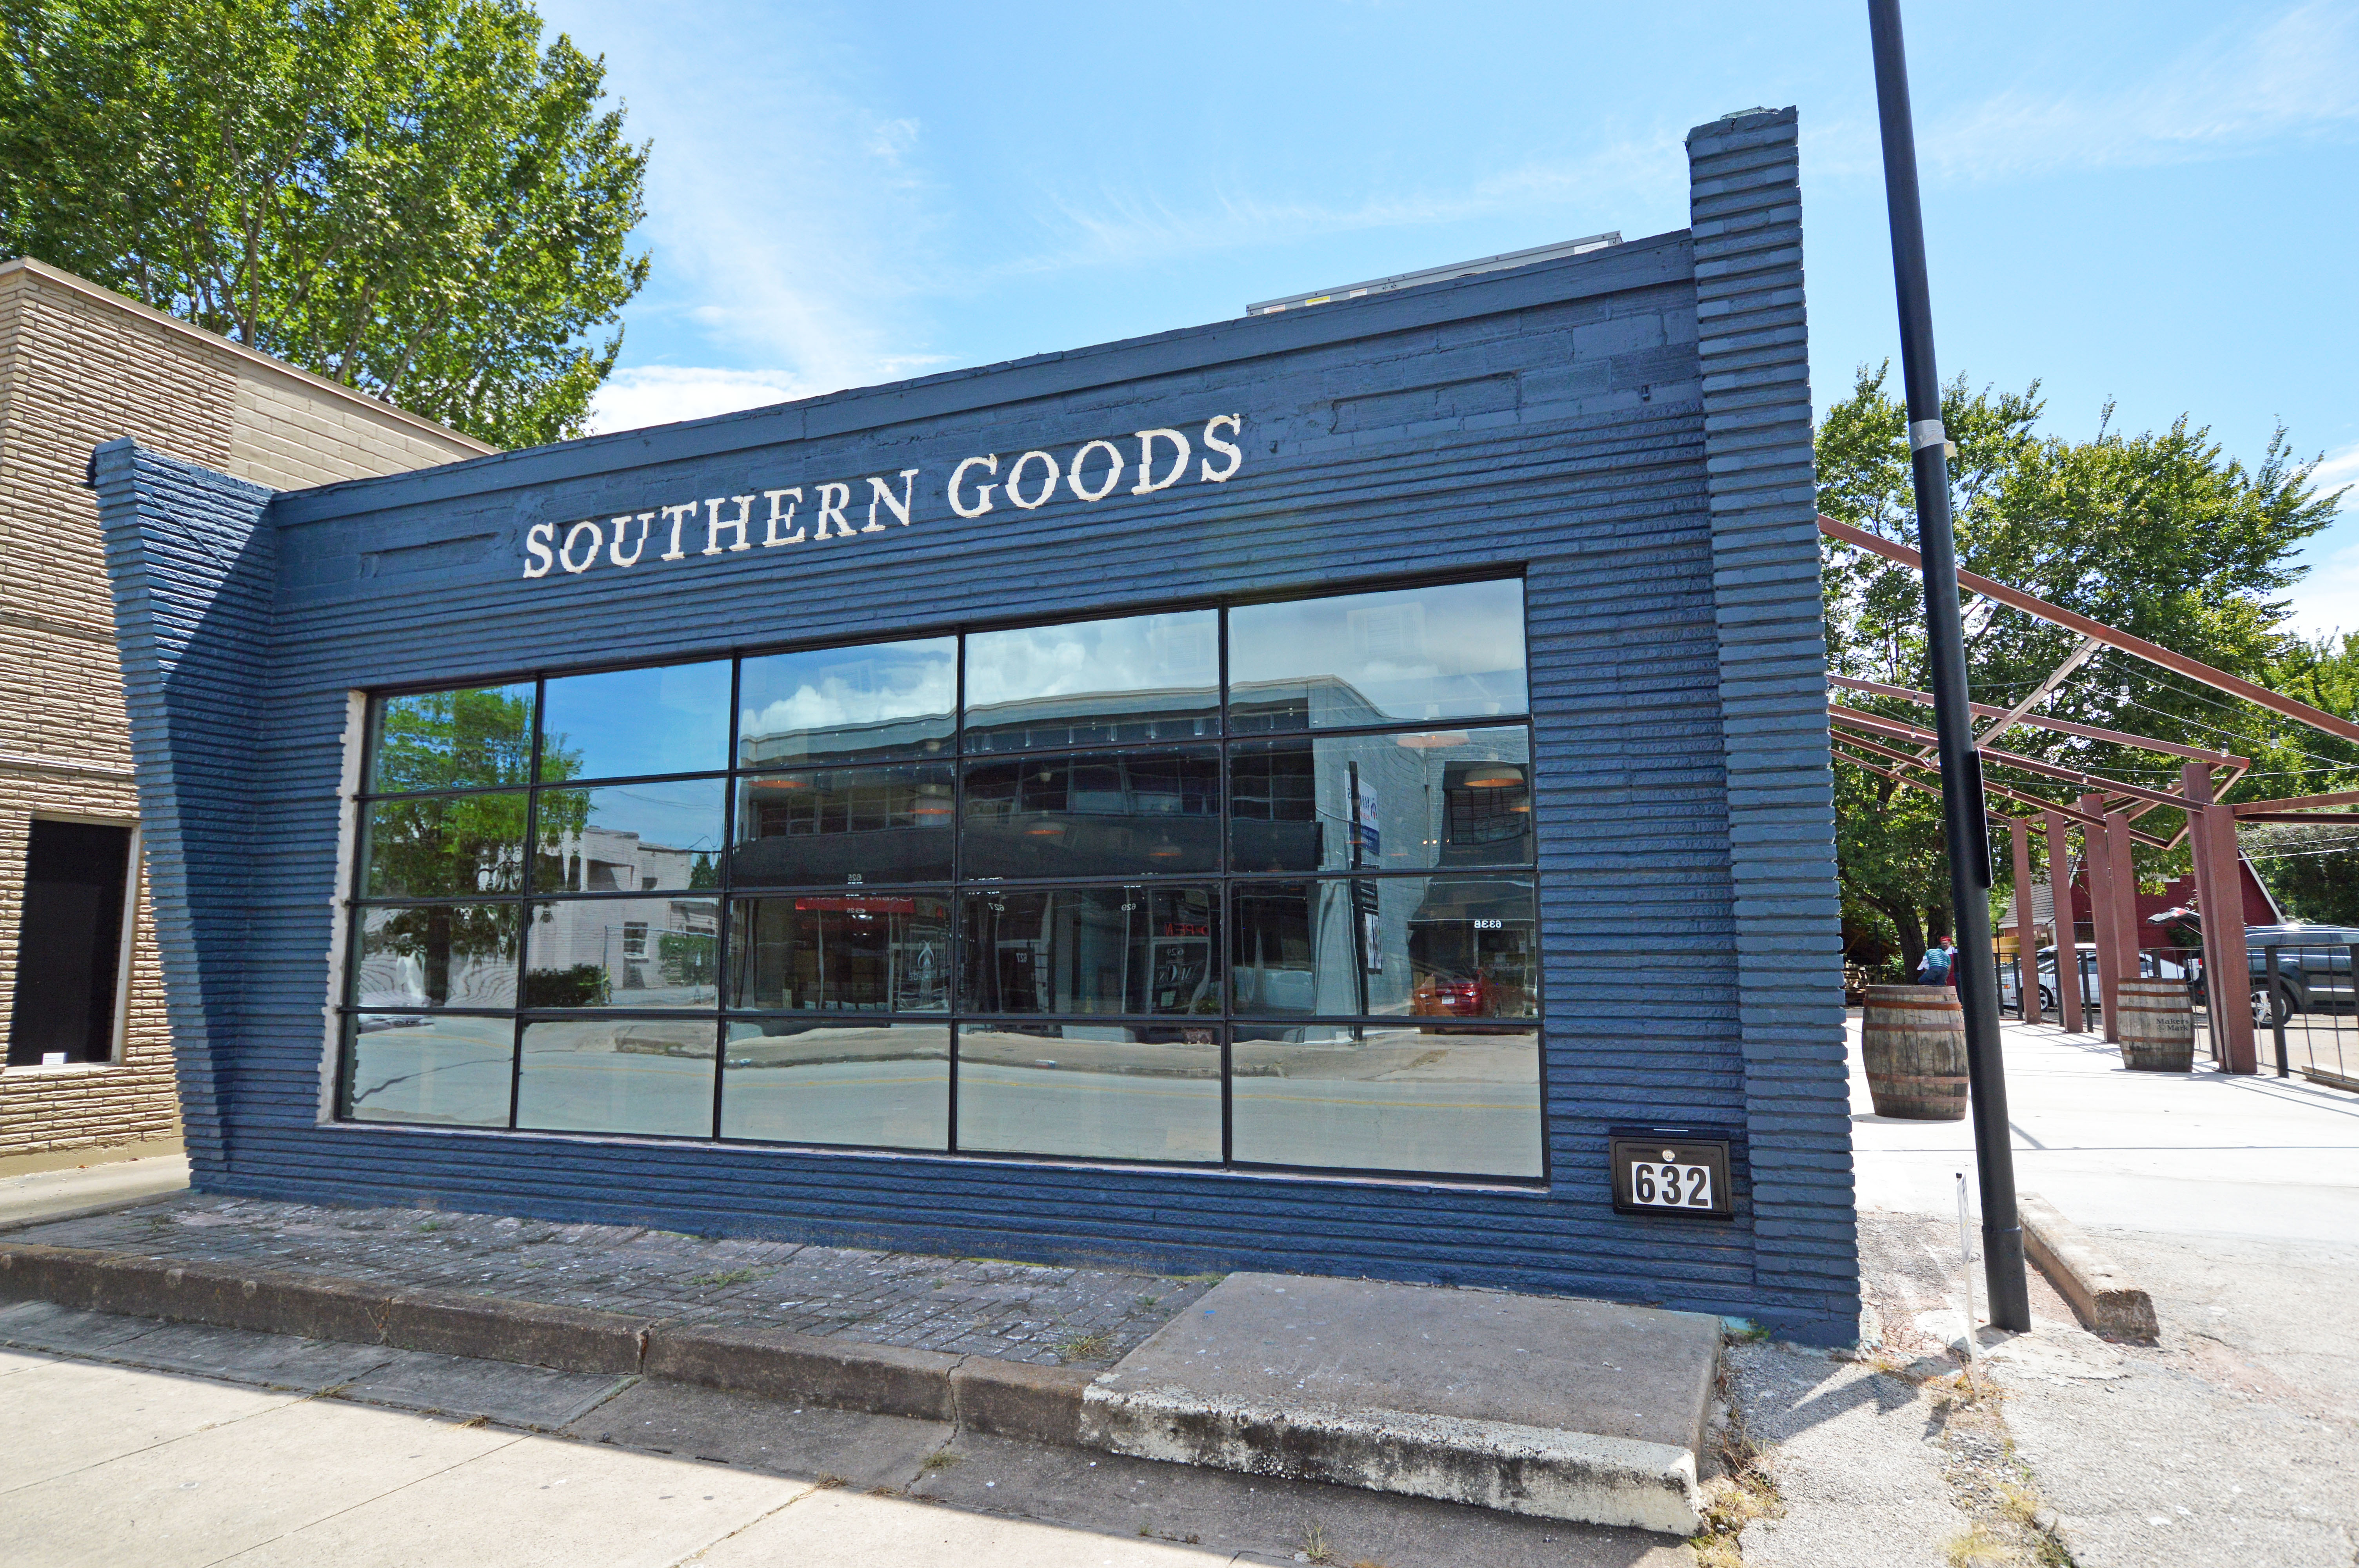 Southern Goods